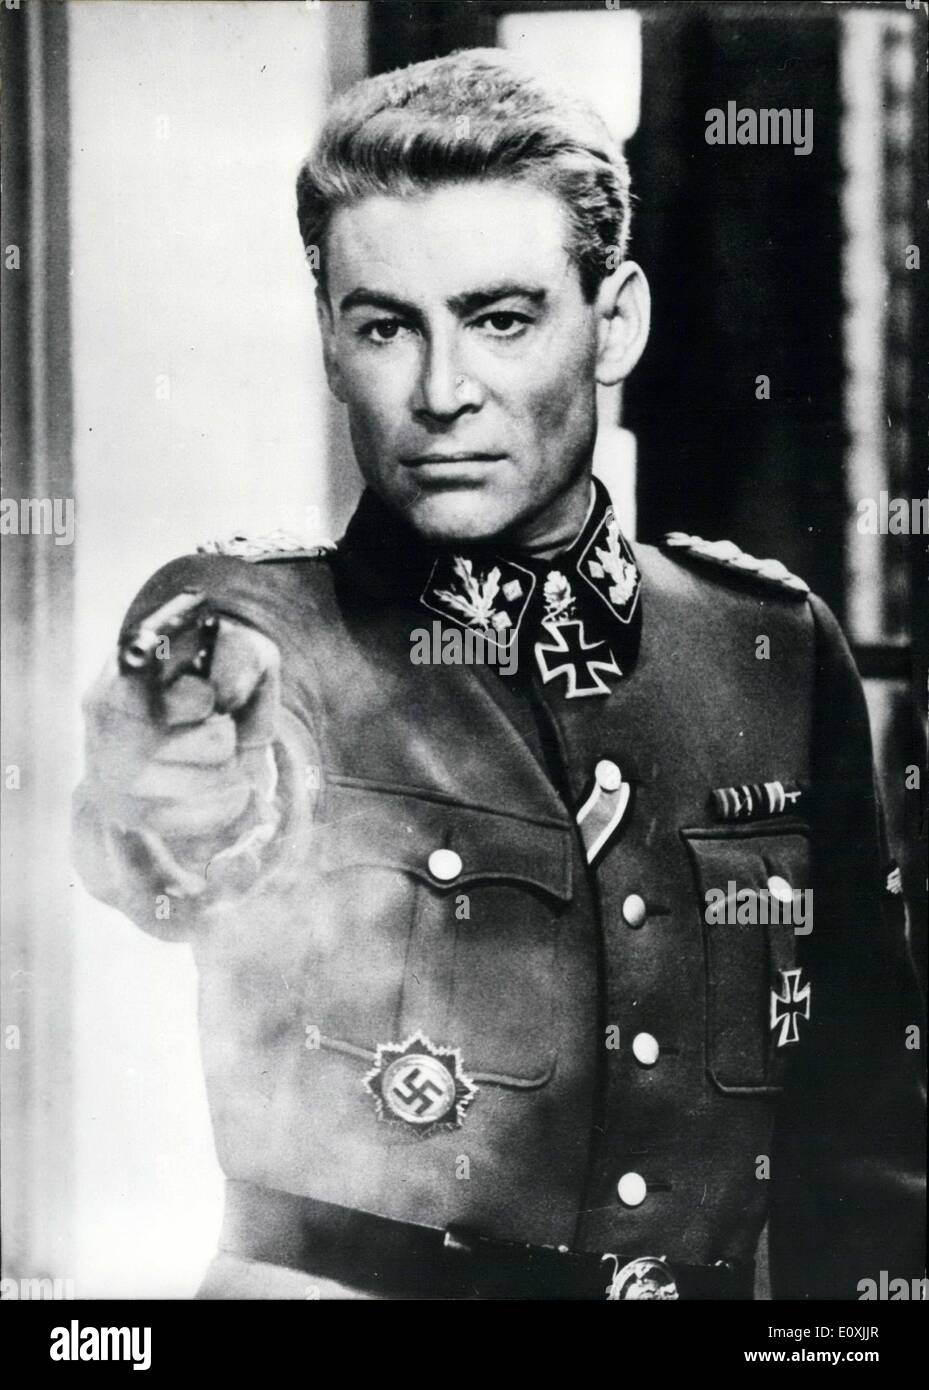 Feb. 18, 1967 - A shot, but at whom? In probably the most unusual role yet of his entire career, Peter O'Toole plays a German divisional commander in World War II in the Anatole Litvak Sam Spiegel production ''Die Nacht der Generale.'' The story of this film, named after the Hans Helmut Kirst's book from which it originated, hands on three mysterious deaths, whose solving lasts more than two decades. Appearing alongside him in other major roles are: Omar Sharif, Tom Courtenay, Donald Pleasence, Joanna Pettet, Charles Gray, and Philippe Noiret. Stock Photo